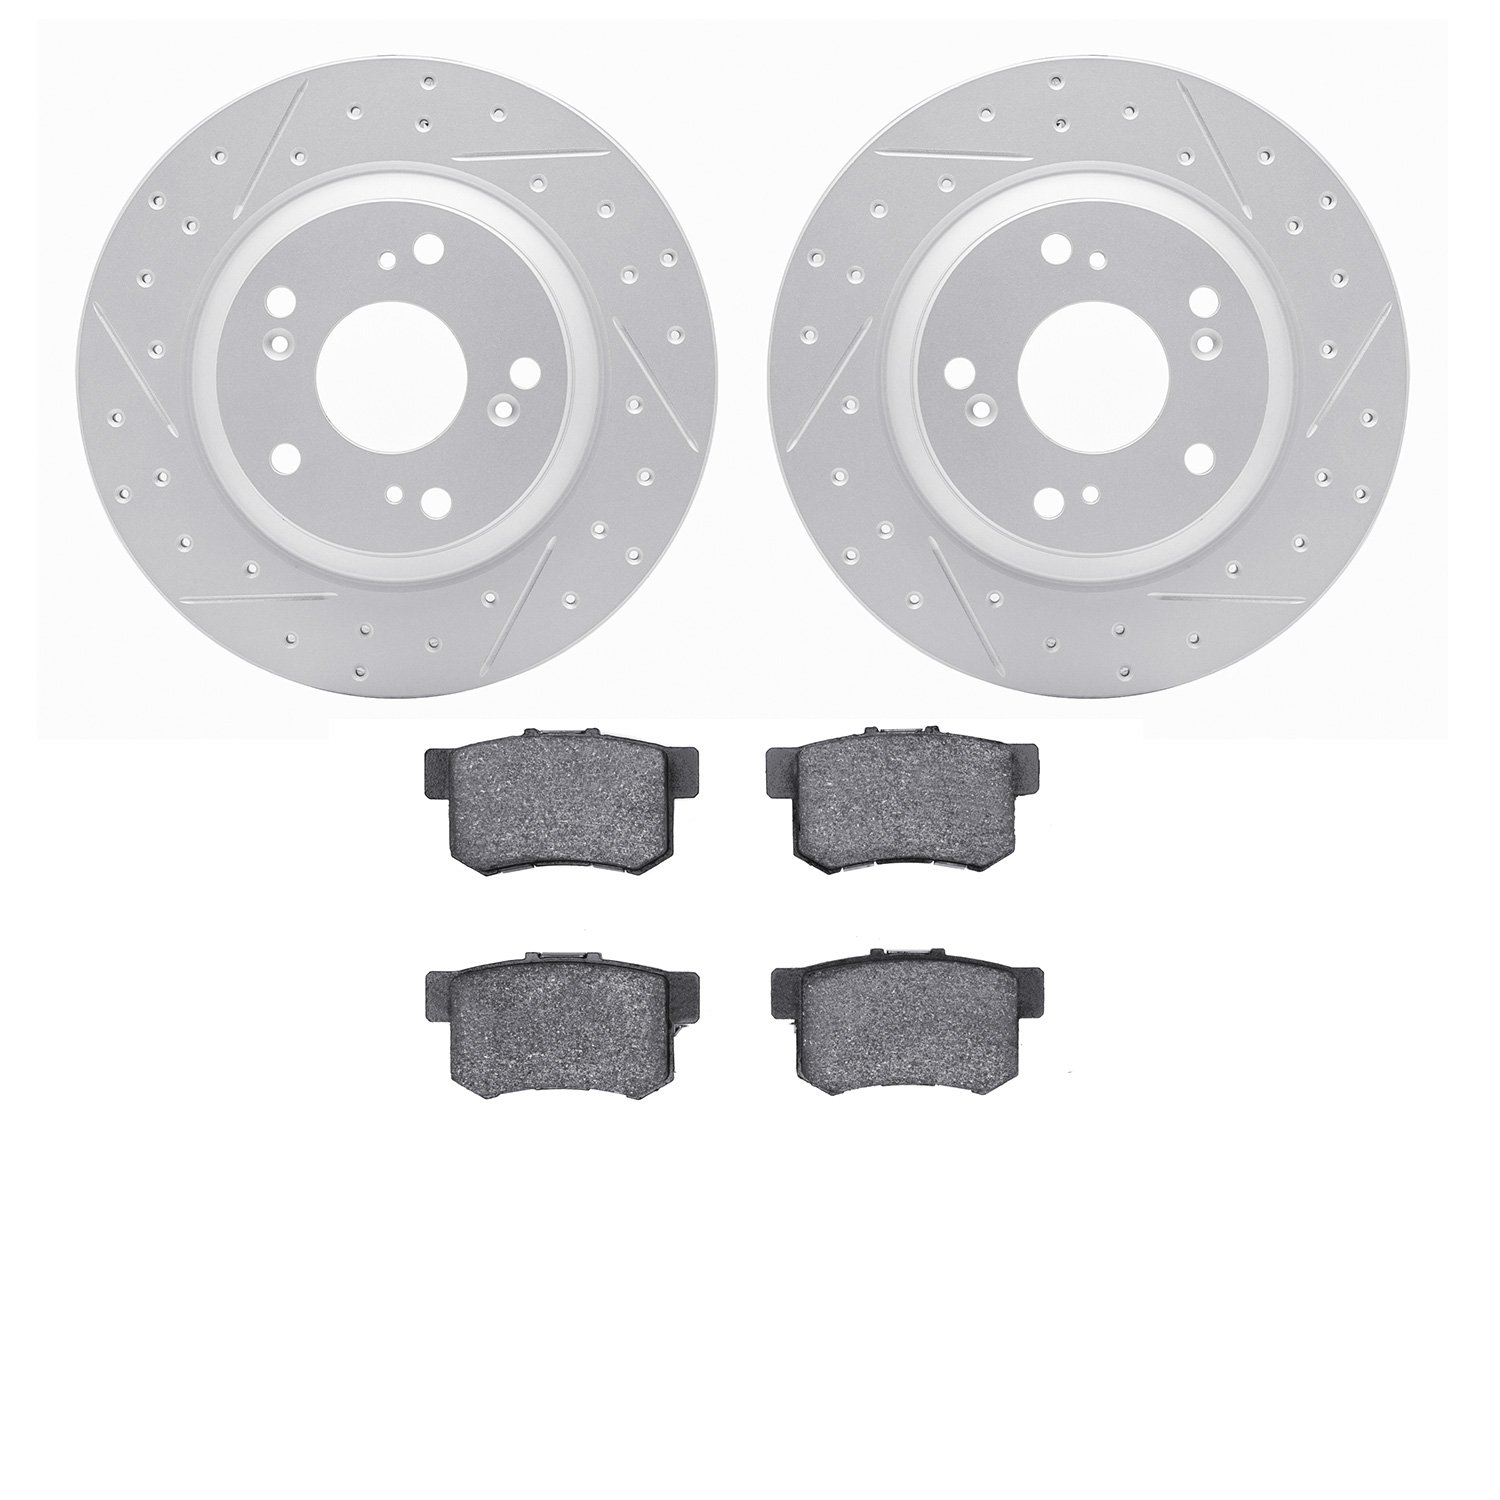 2502-59025 Geoperformance Drilled/Slotted Rotors w/5000 Advanced Brake Pads Kit, 2000-2009 Acura/Honda, Position: Rear